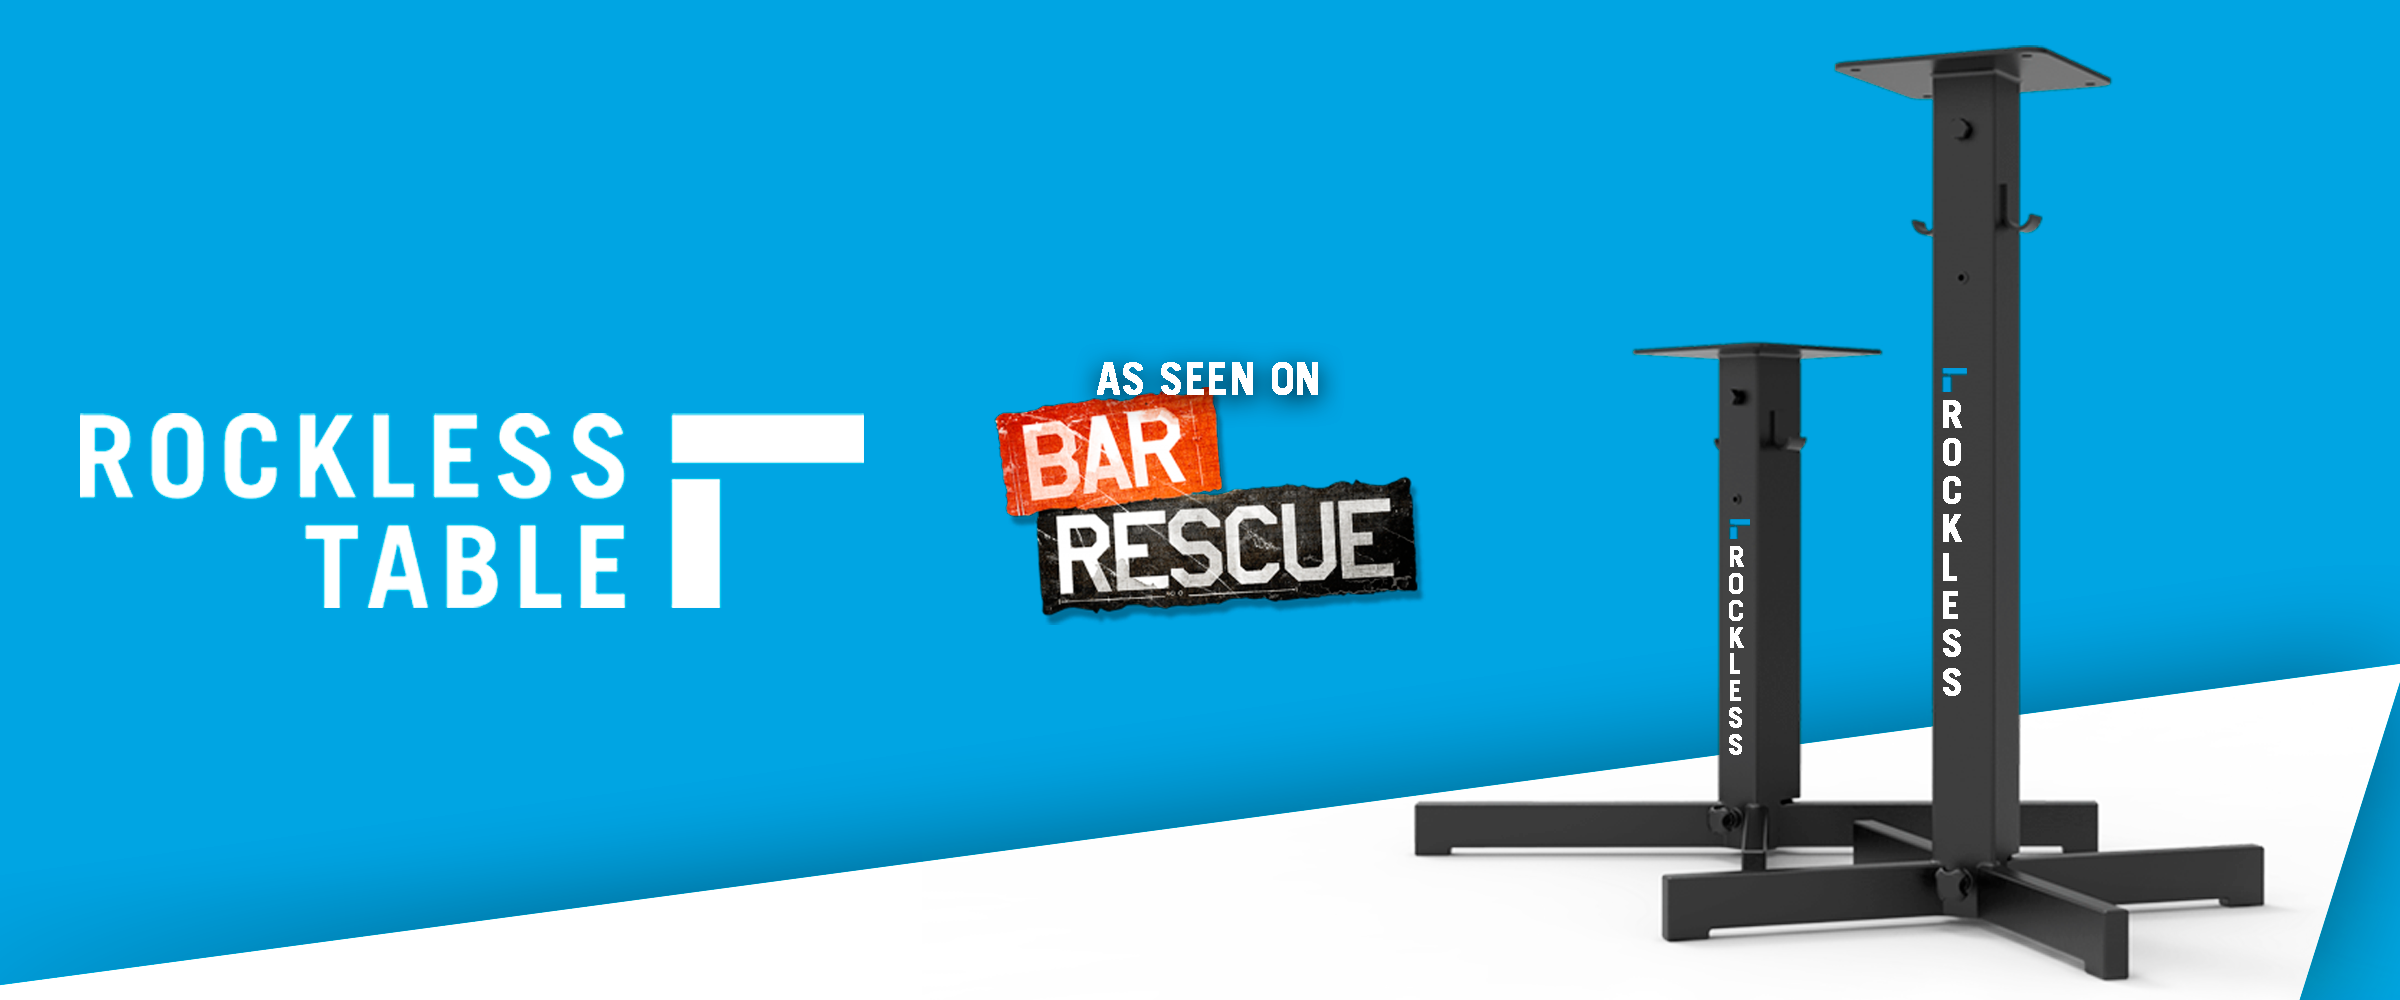 Revolutionary Rockless Table Featured on the Paramount Network’s Bar Rescue as the solution to one of the most common complaints